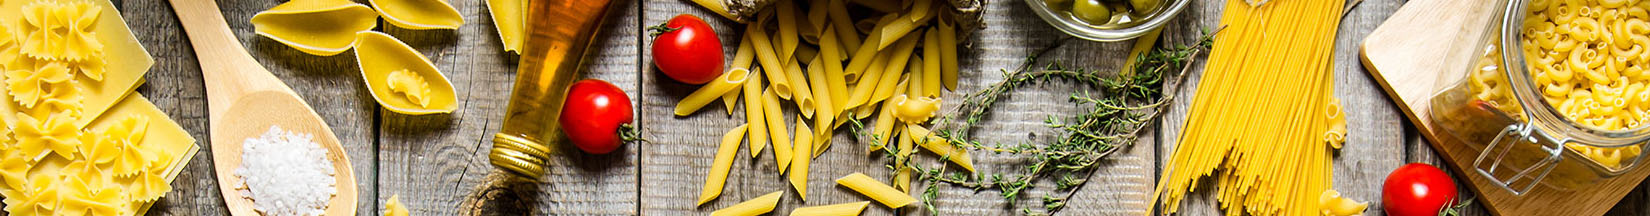 CANNEROZZETTI NR. 24 :: PASTA :: SIDE ORDERS :: FOOD DRY